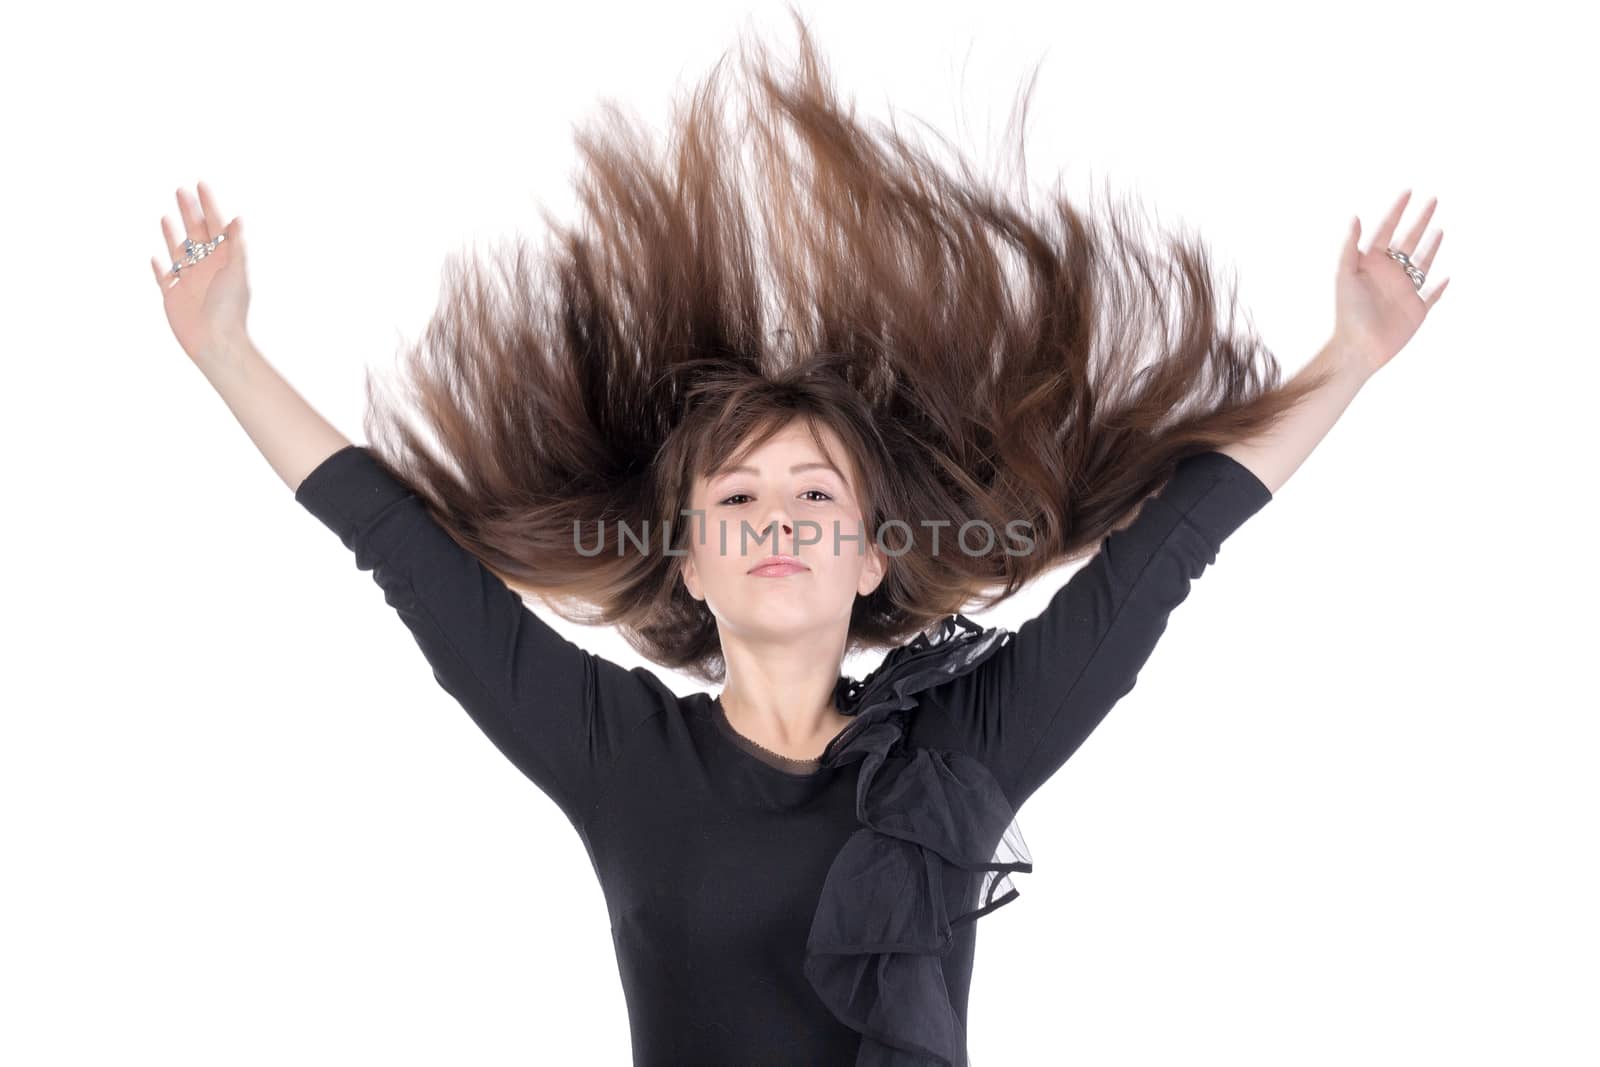 Young woman with her long straight brunette hair flying in the air and her arms raised above her head isolated on white